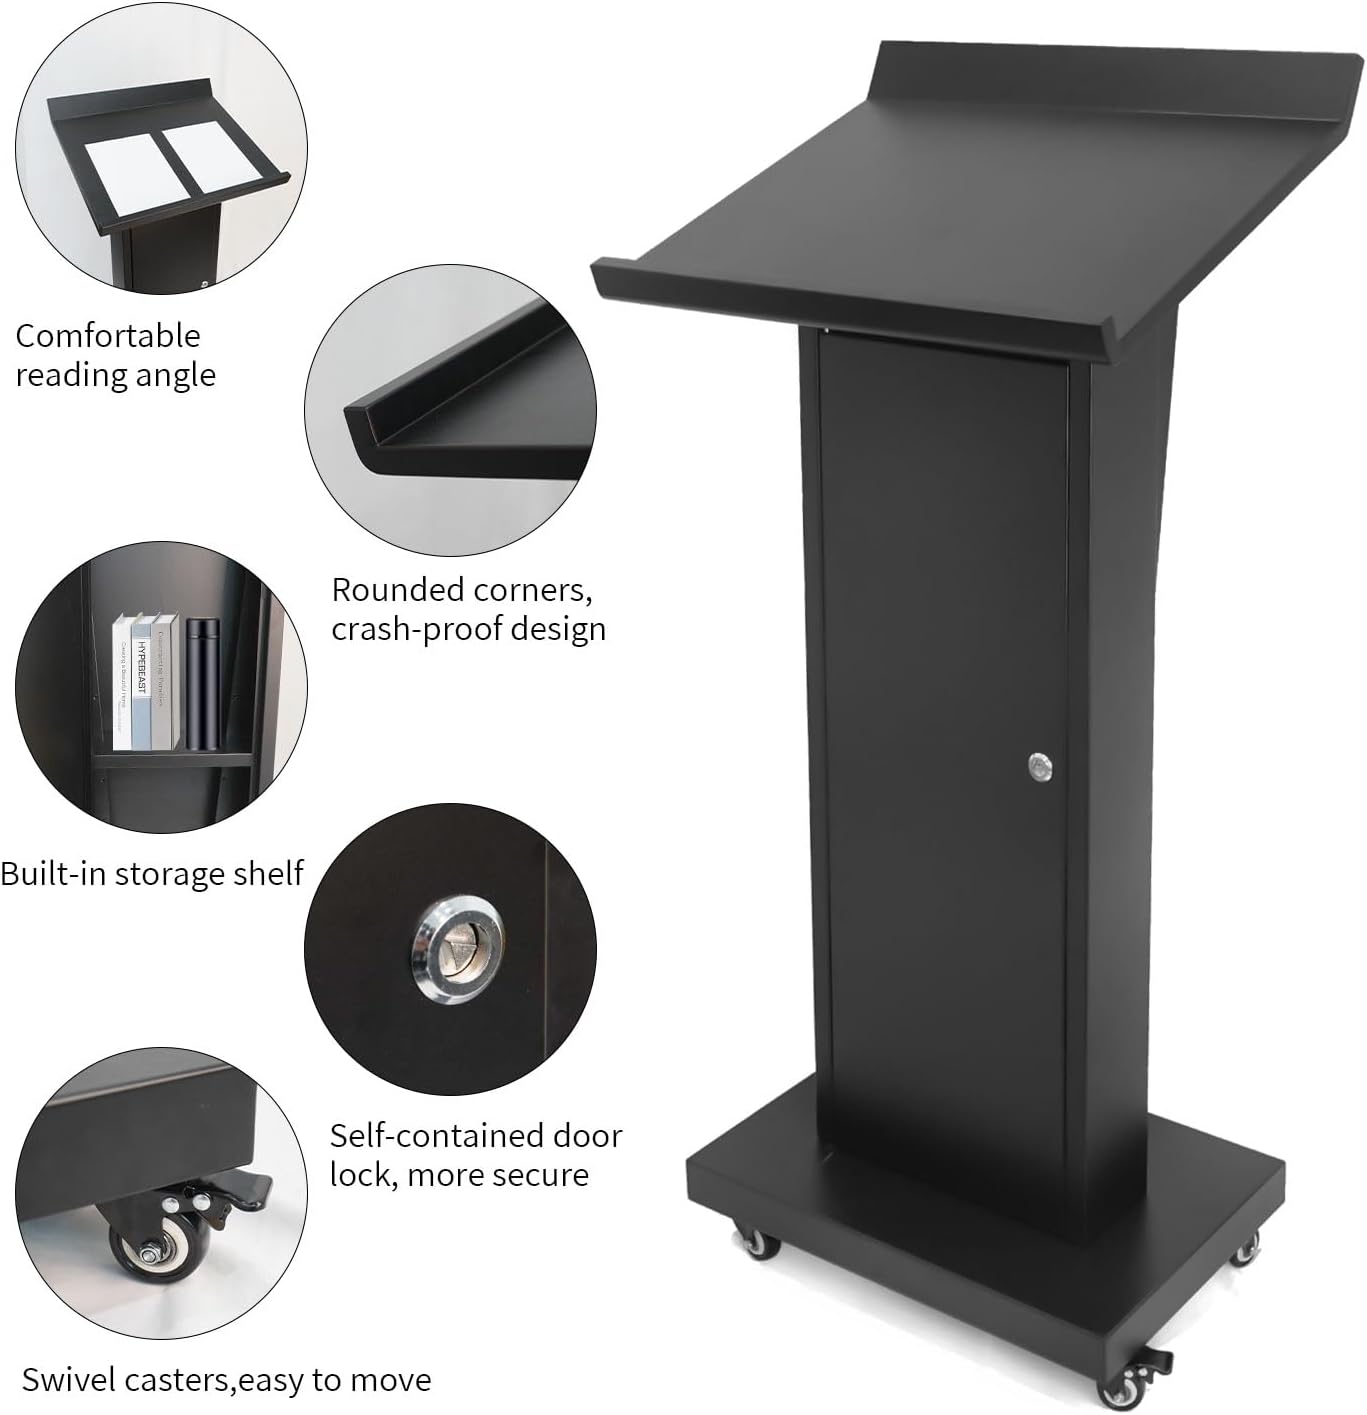 Podium Stand with 4 Locking Wheels, Lecterns & Podiums for Church School Office Conference Home, Heavy Duty Metal, Large Storage Area, Slant Desktop, 50.4" H